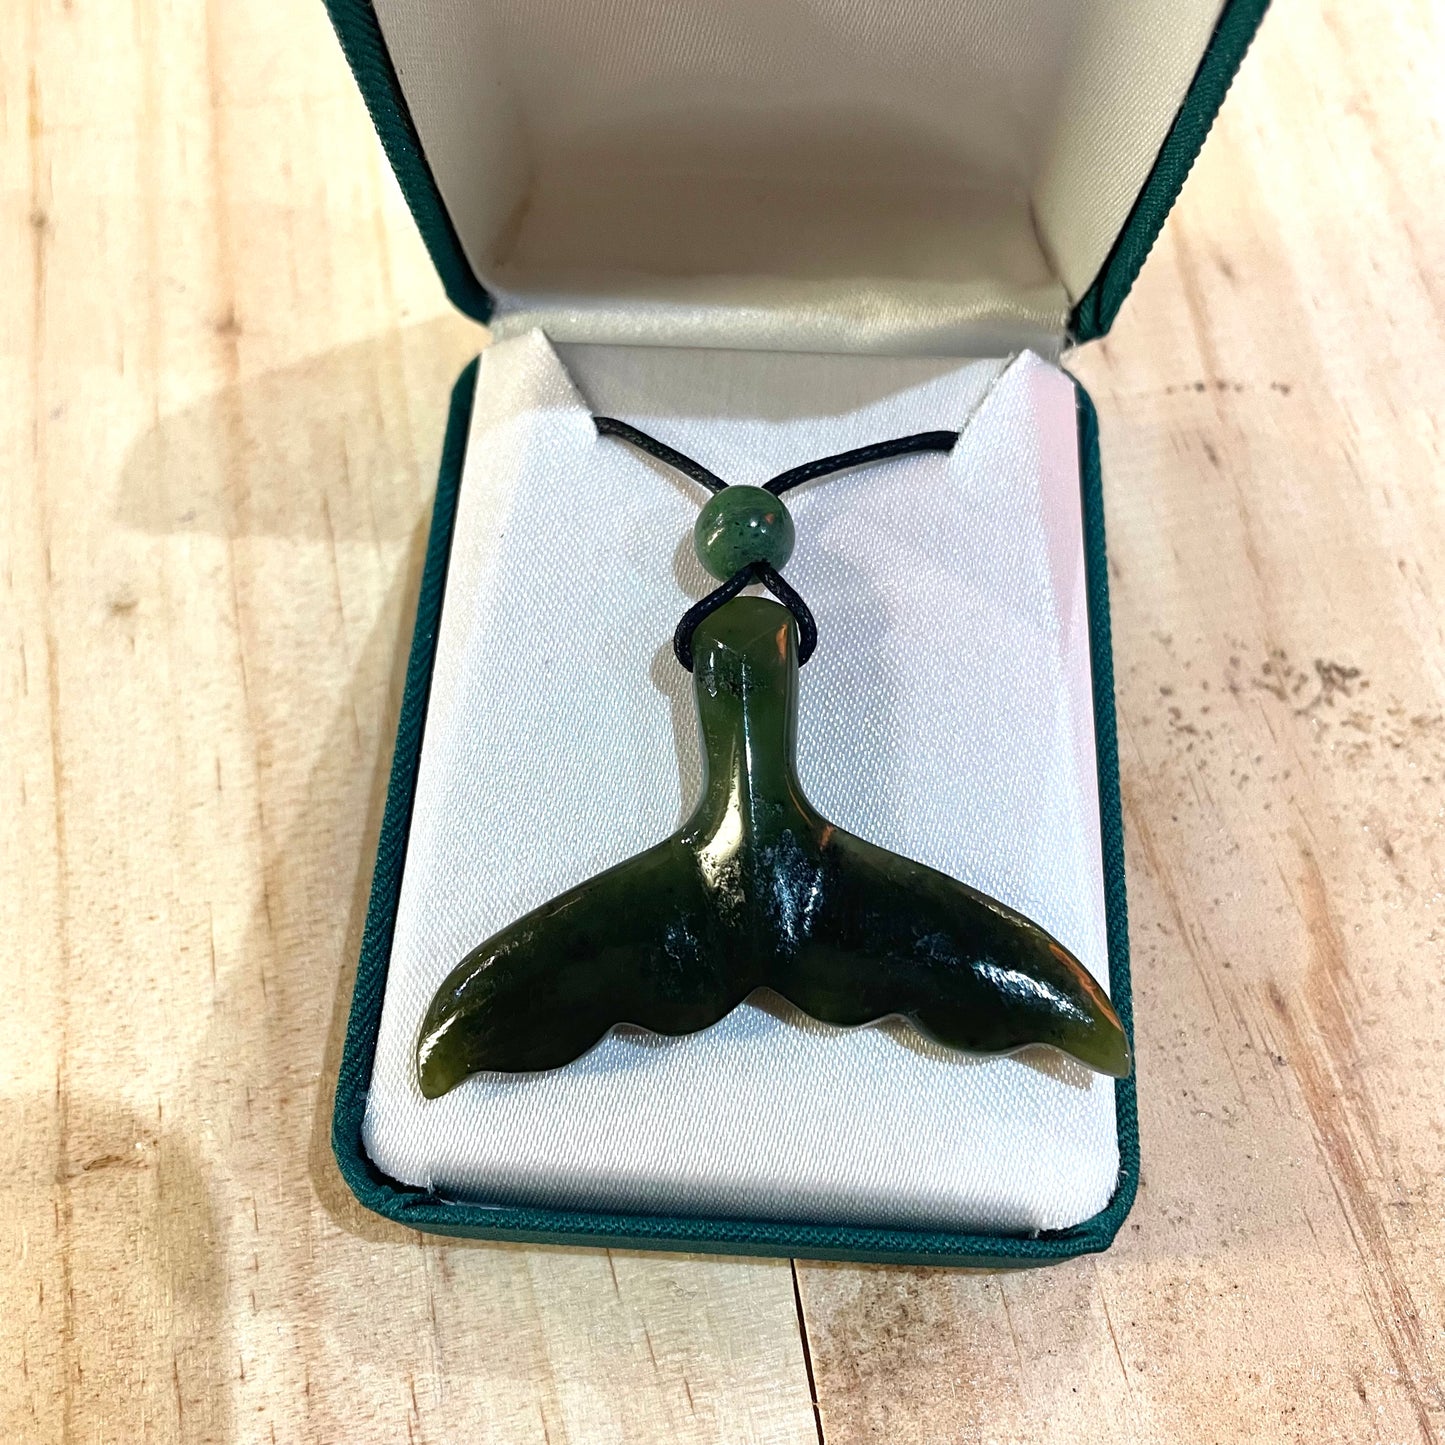 Whale's Pendant 2 inches - Rivendell Shop